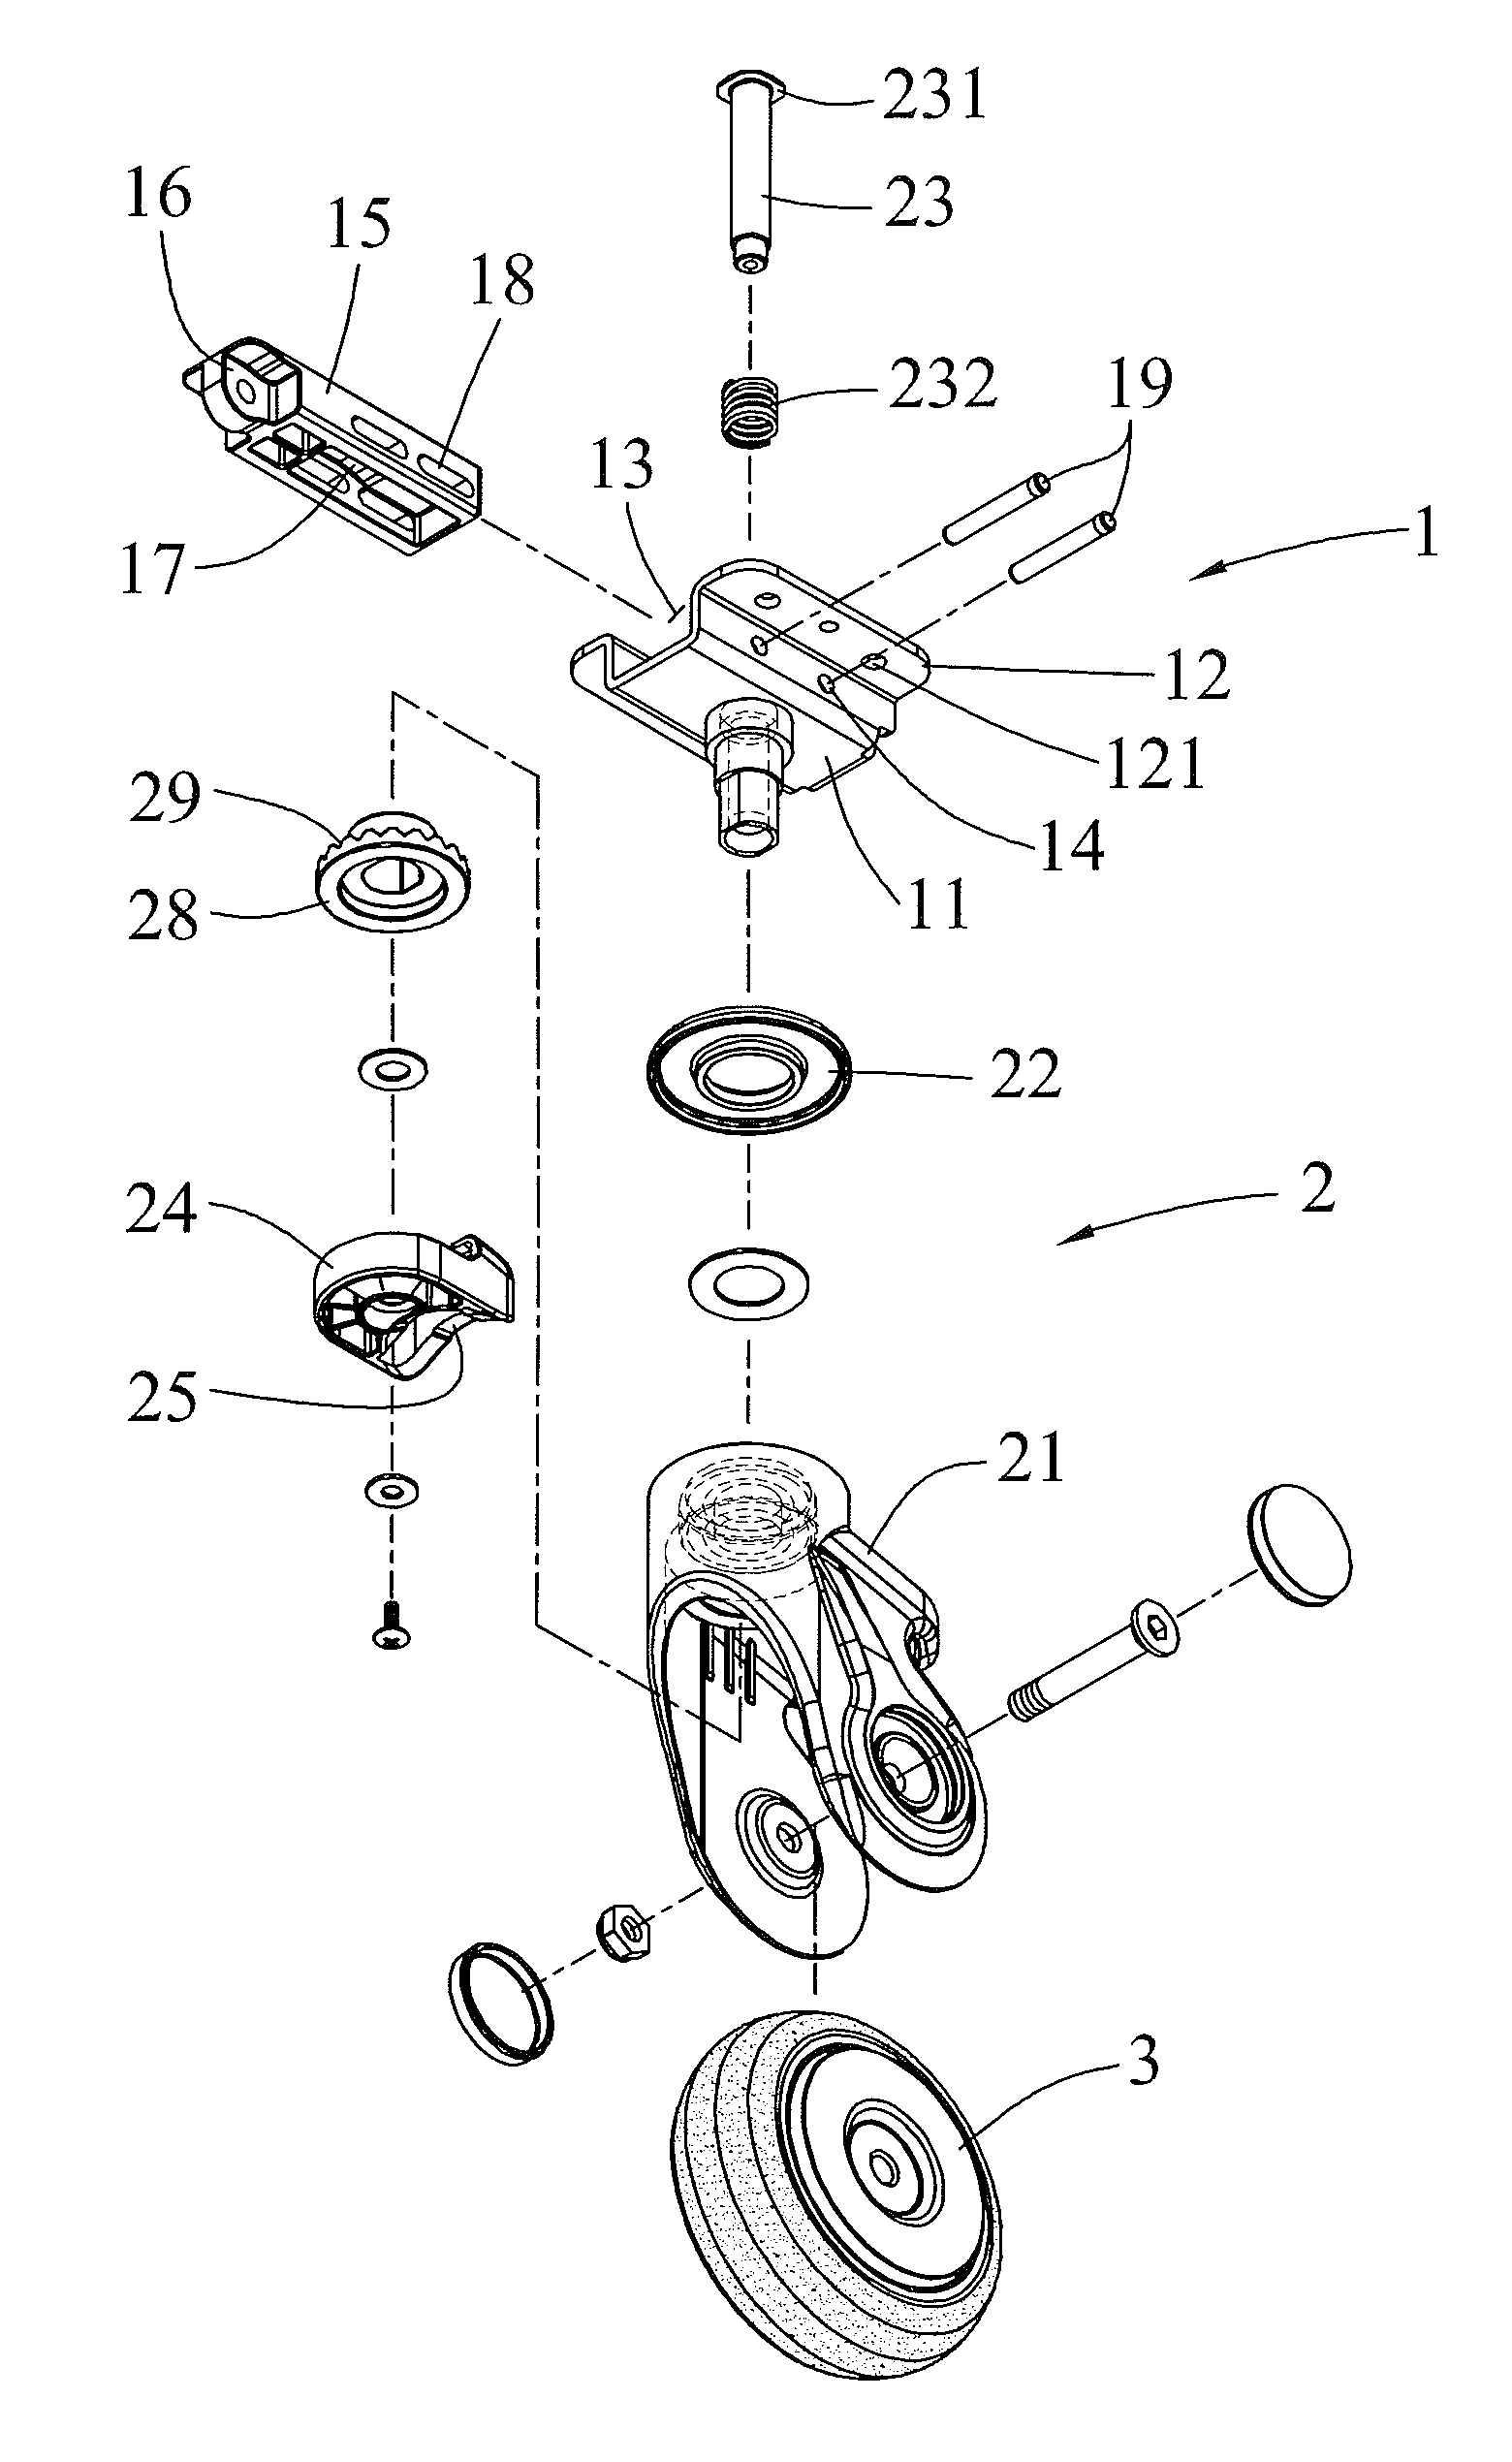 Combination castor brake system whose castor assemblies are braked and positioned simultaneously